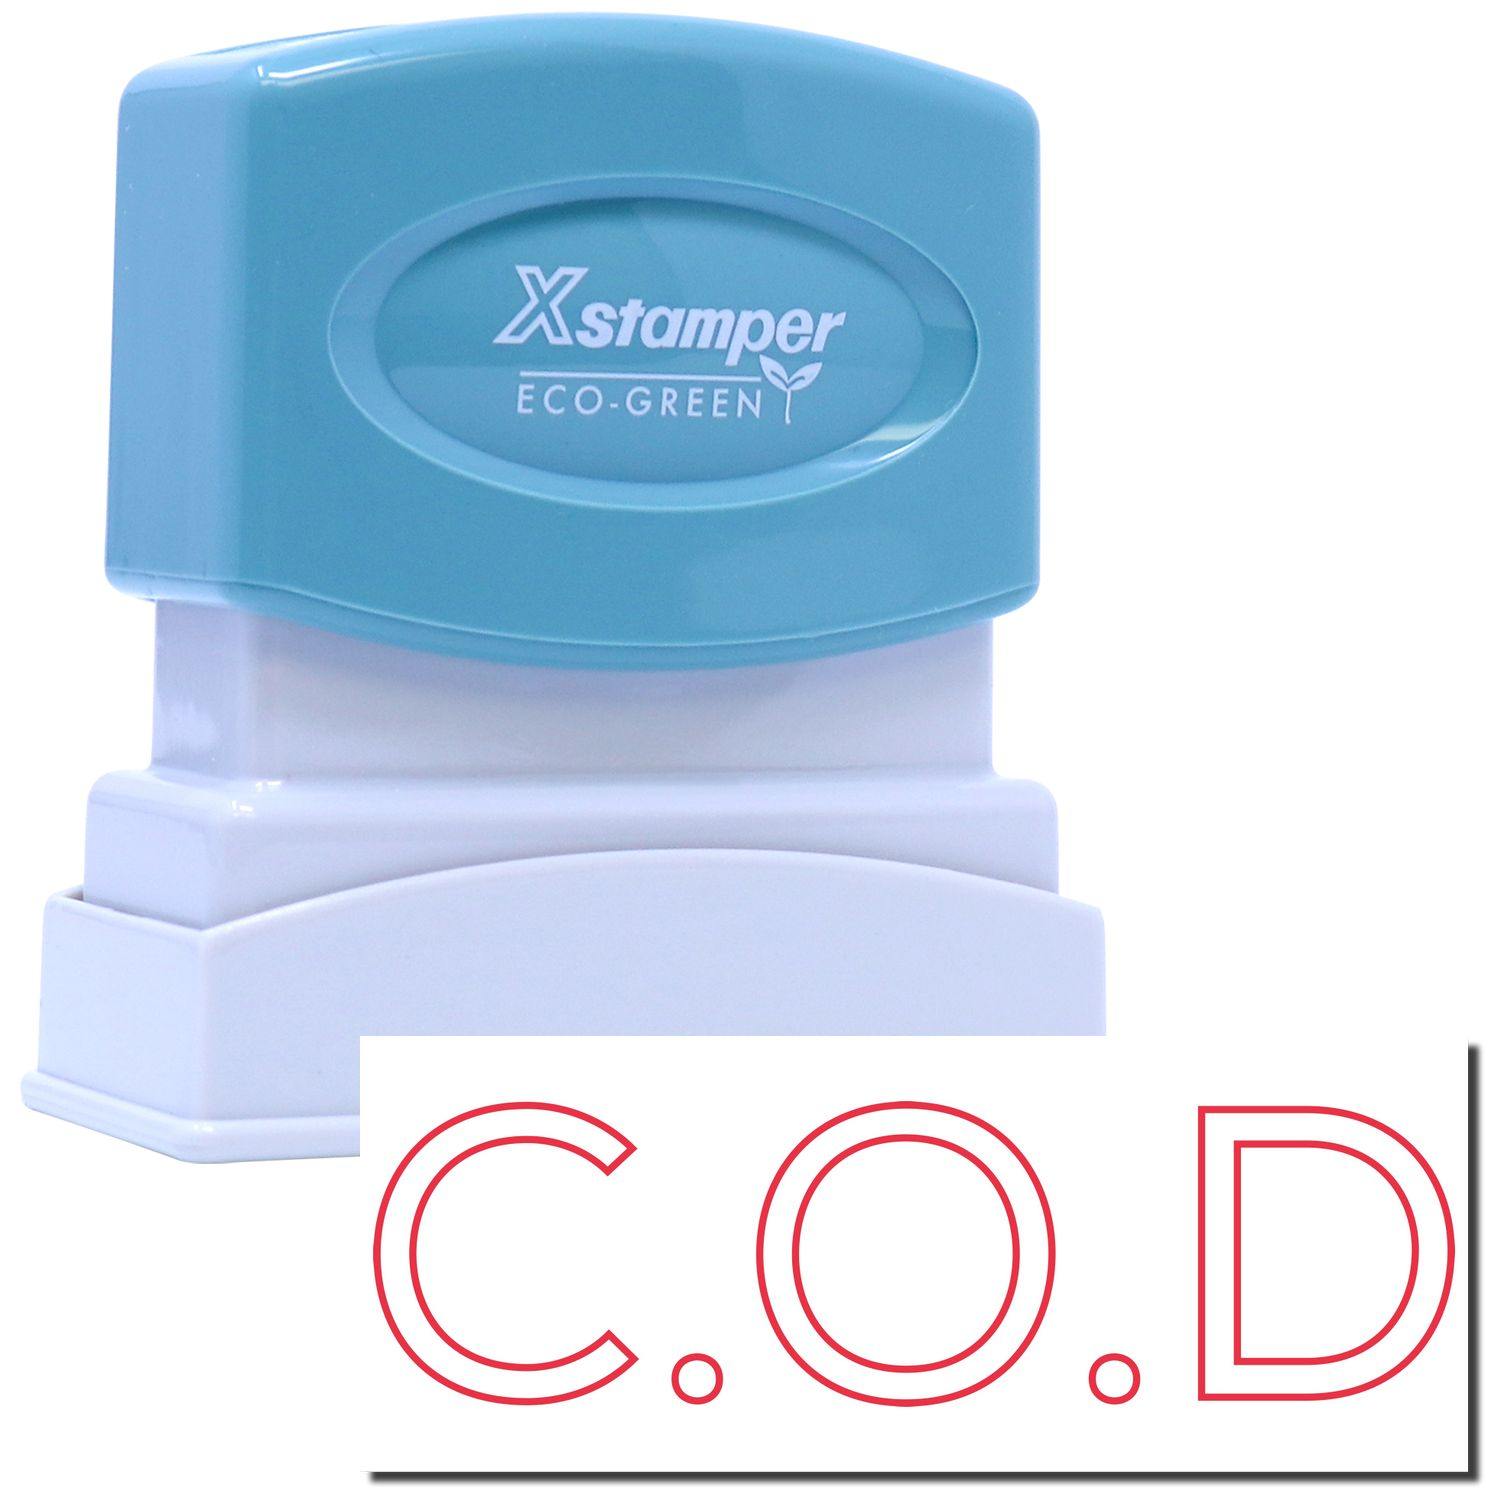 An xstamper stamp with a stamped image showing how the text "C.O.D" in an outline font is displayed after stamping.